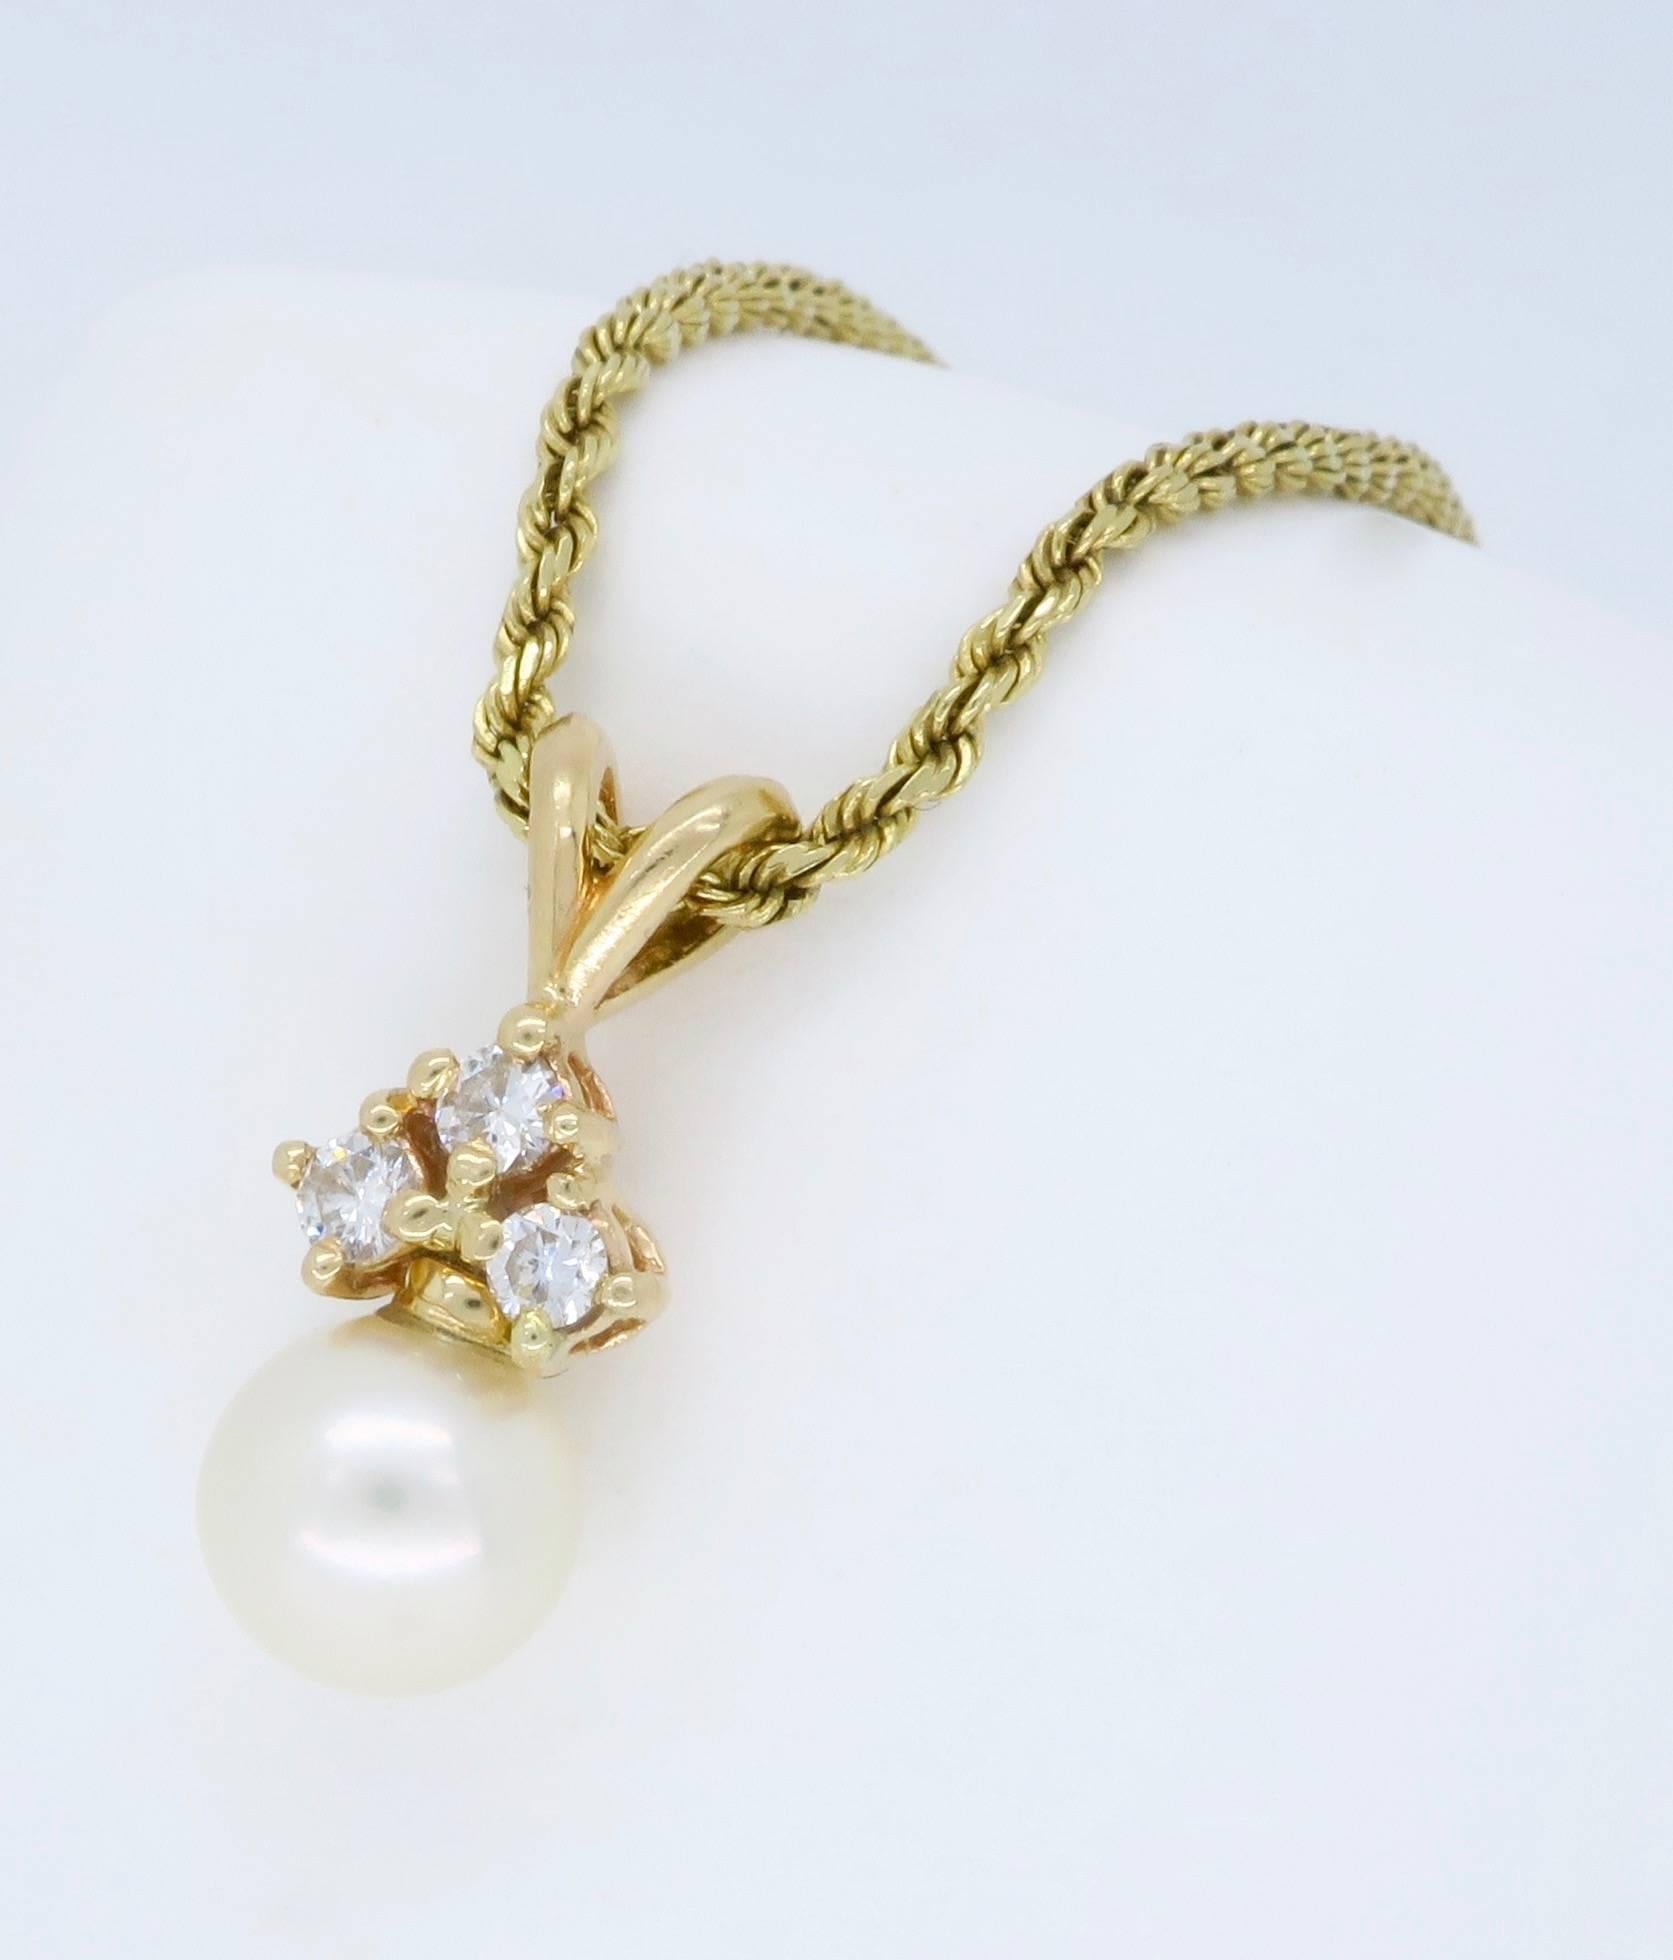 Classic drop necklace features an approximately 8.10mm Round Pearl, the pearl is accented by three Round Brilliant Cut Diamonds totaling approximately .18CTW.  The 14K yellow gold necklace is 18” in length and weighs 7.5 grams. The necklace is